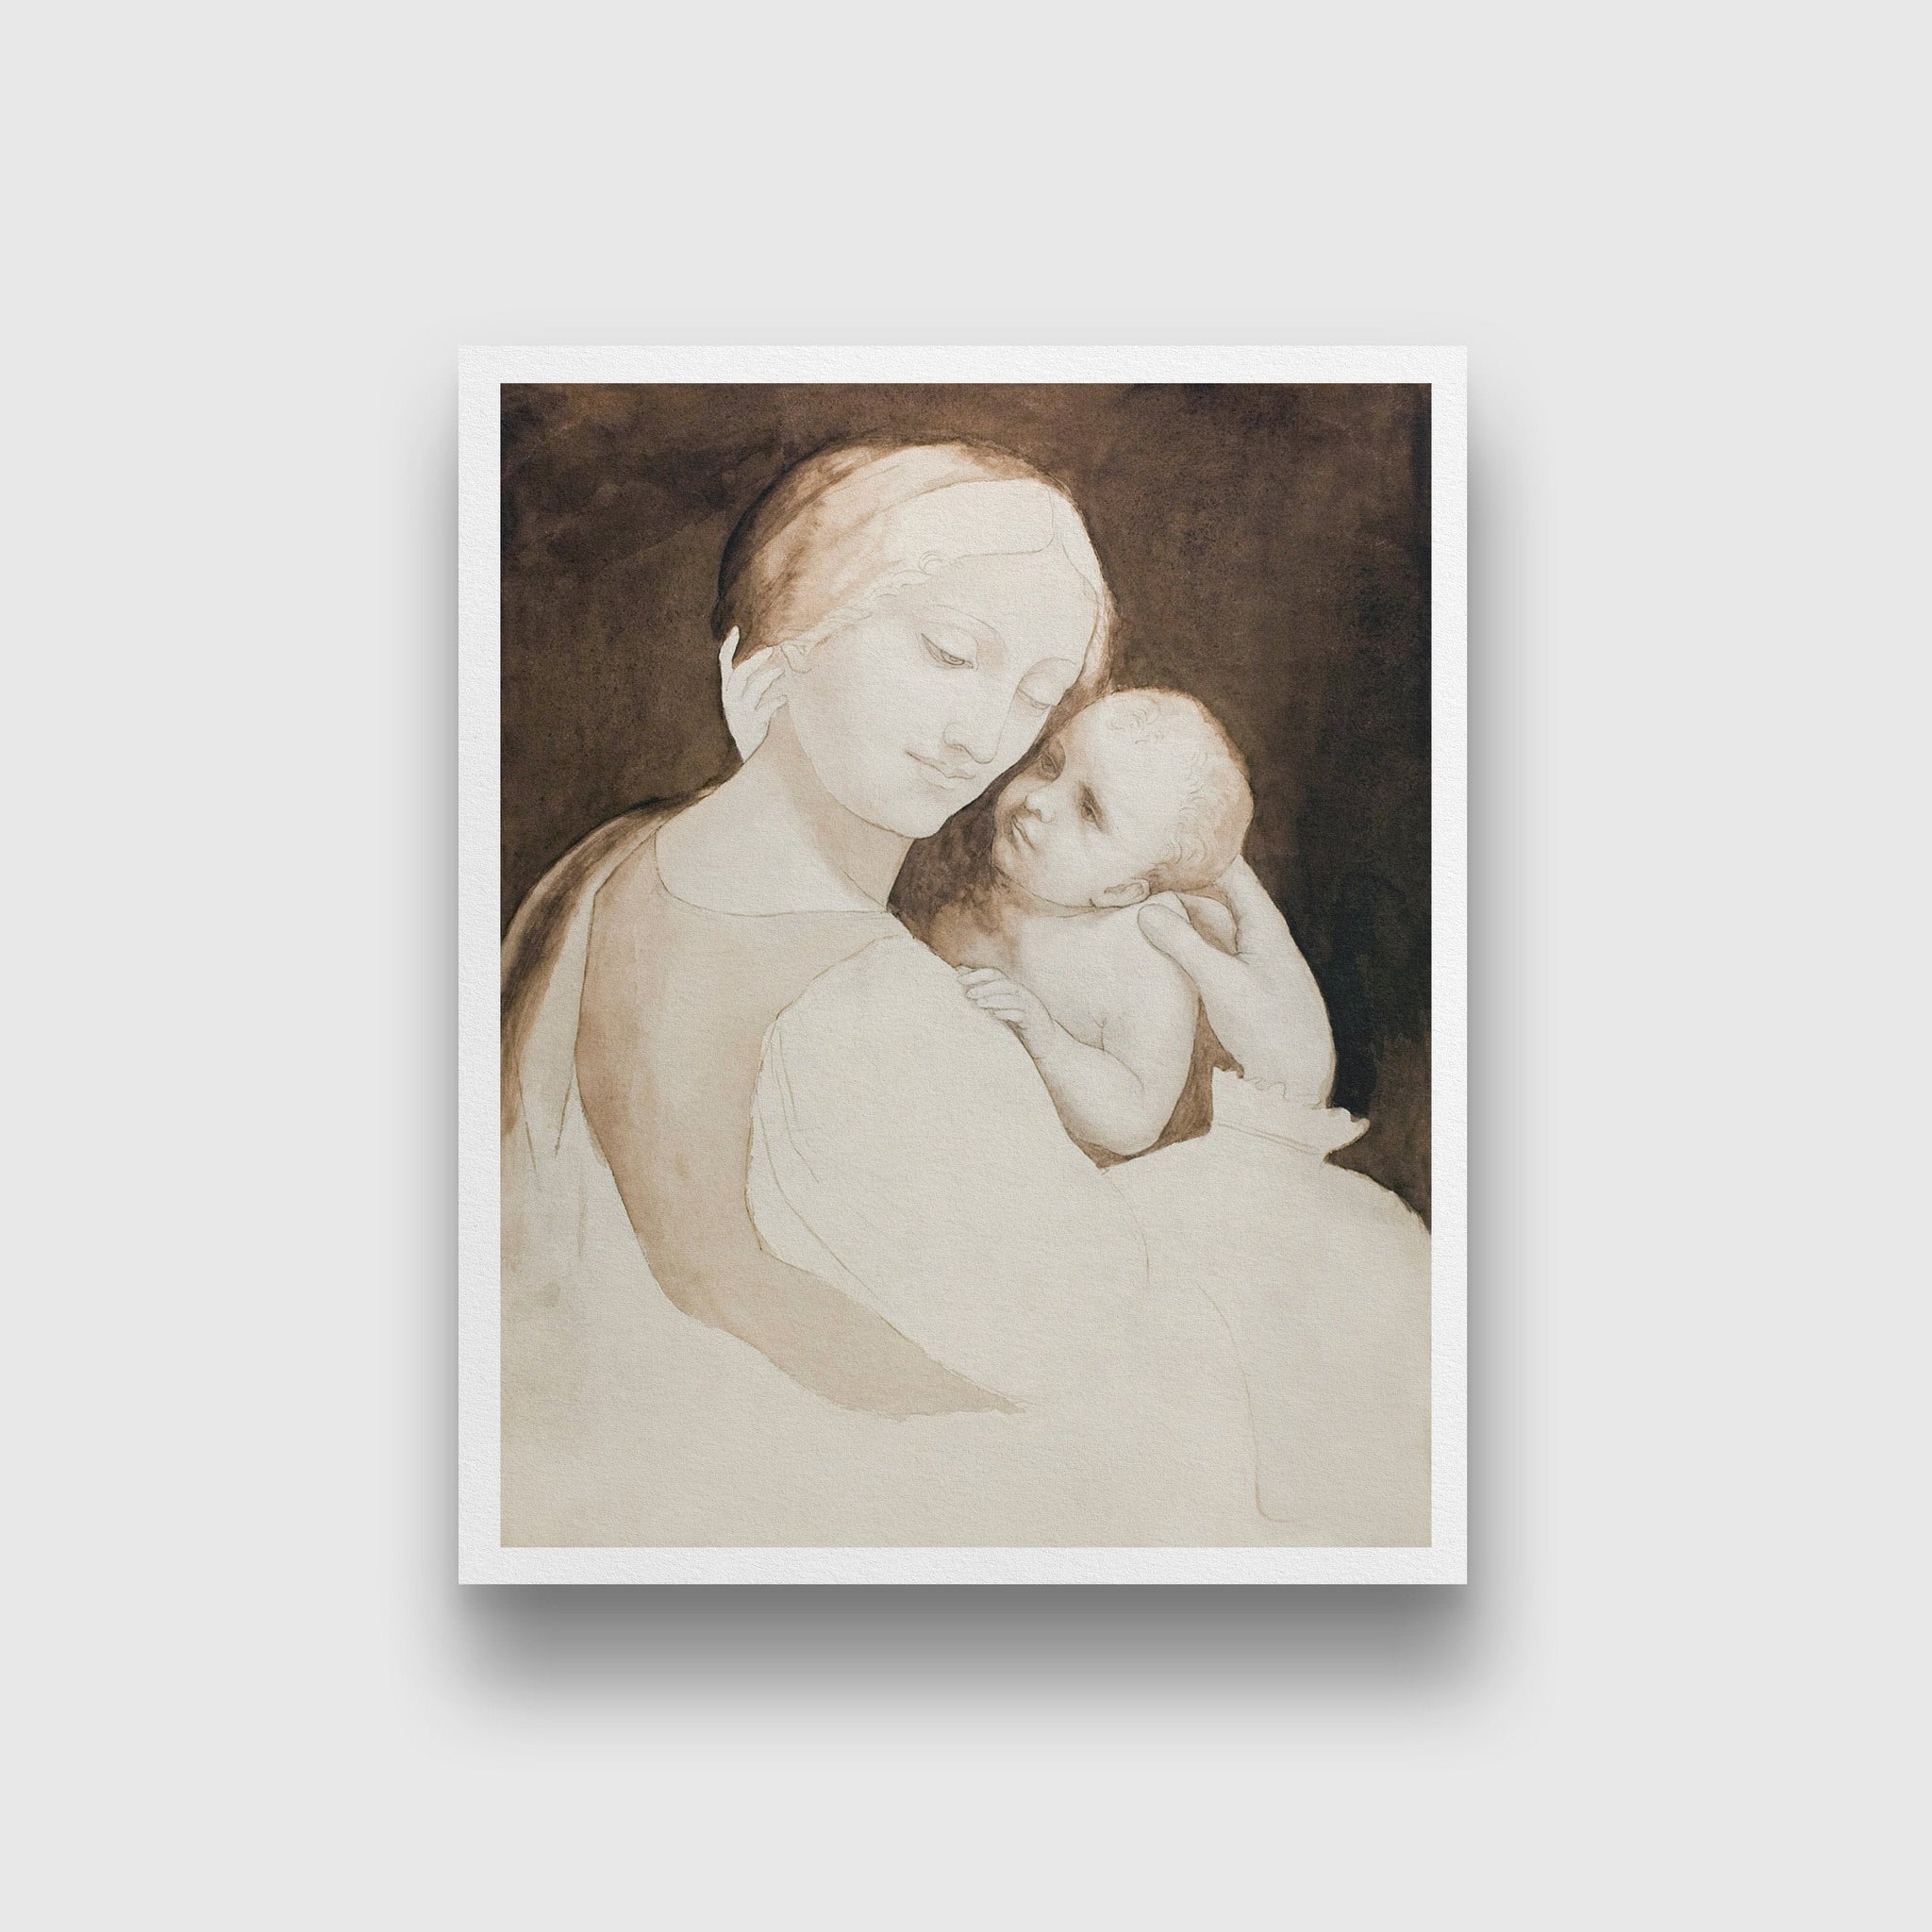 Madonna and Child, and Fragment of Woman’s Torso Painting - Meri Deewar